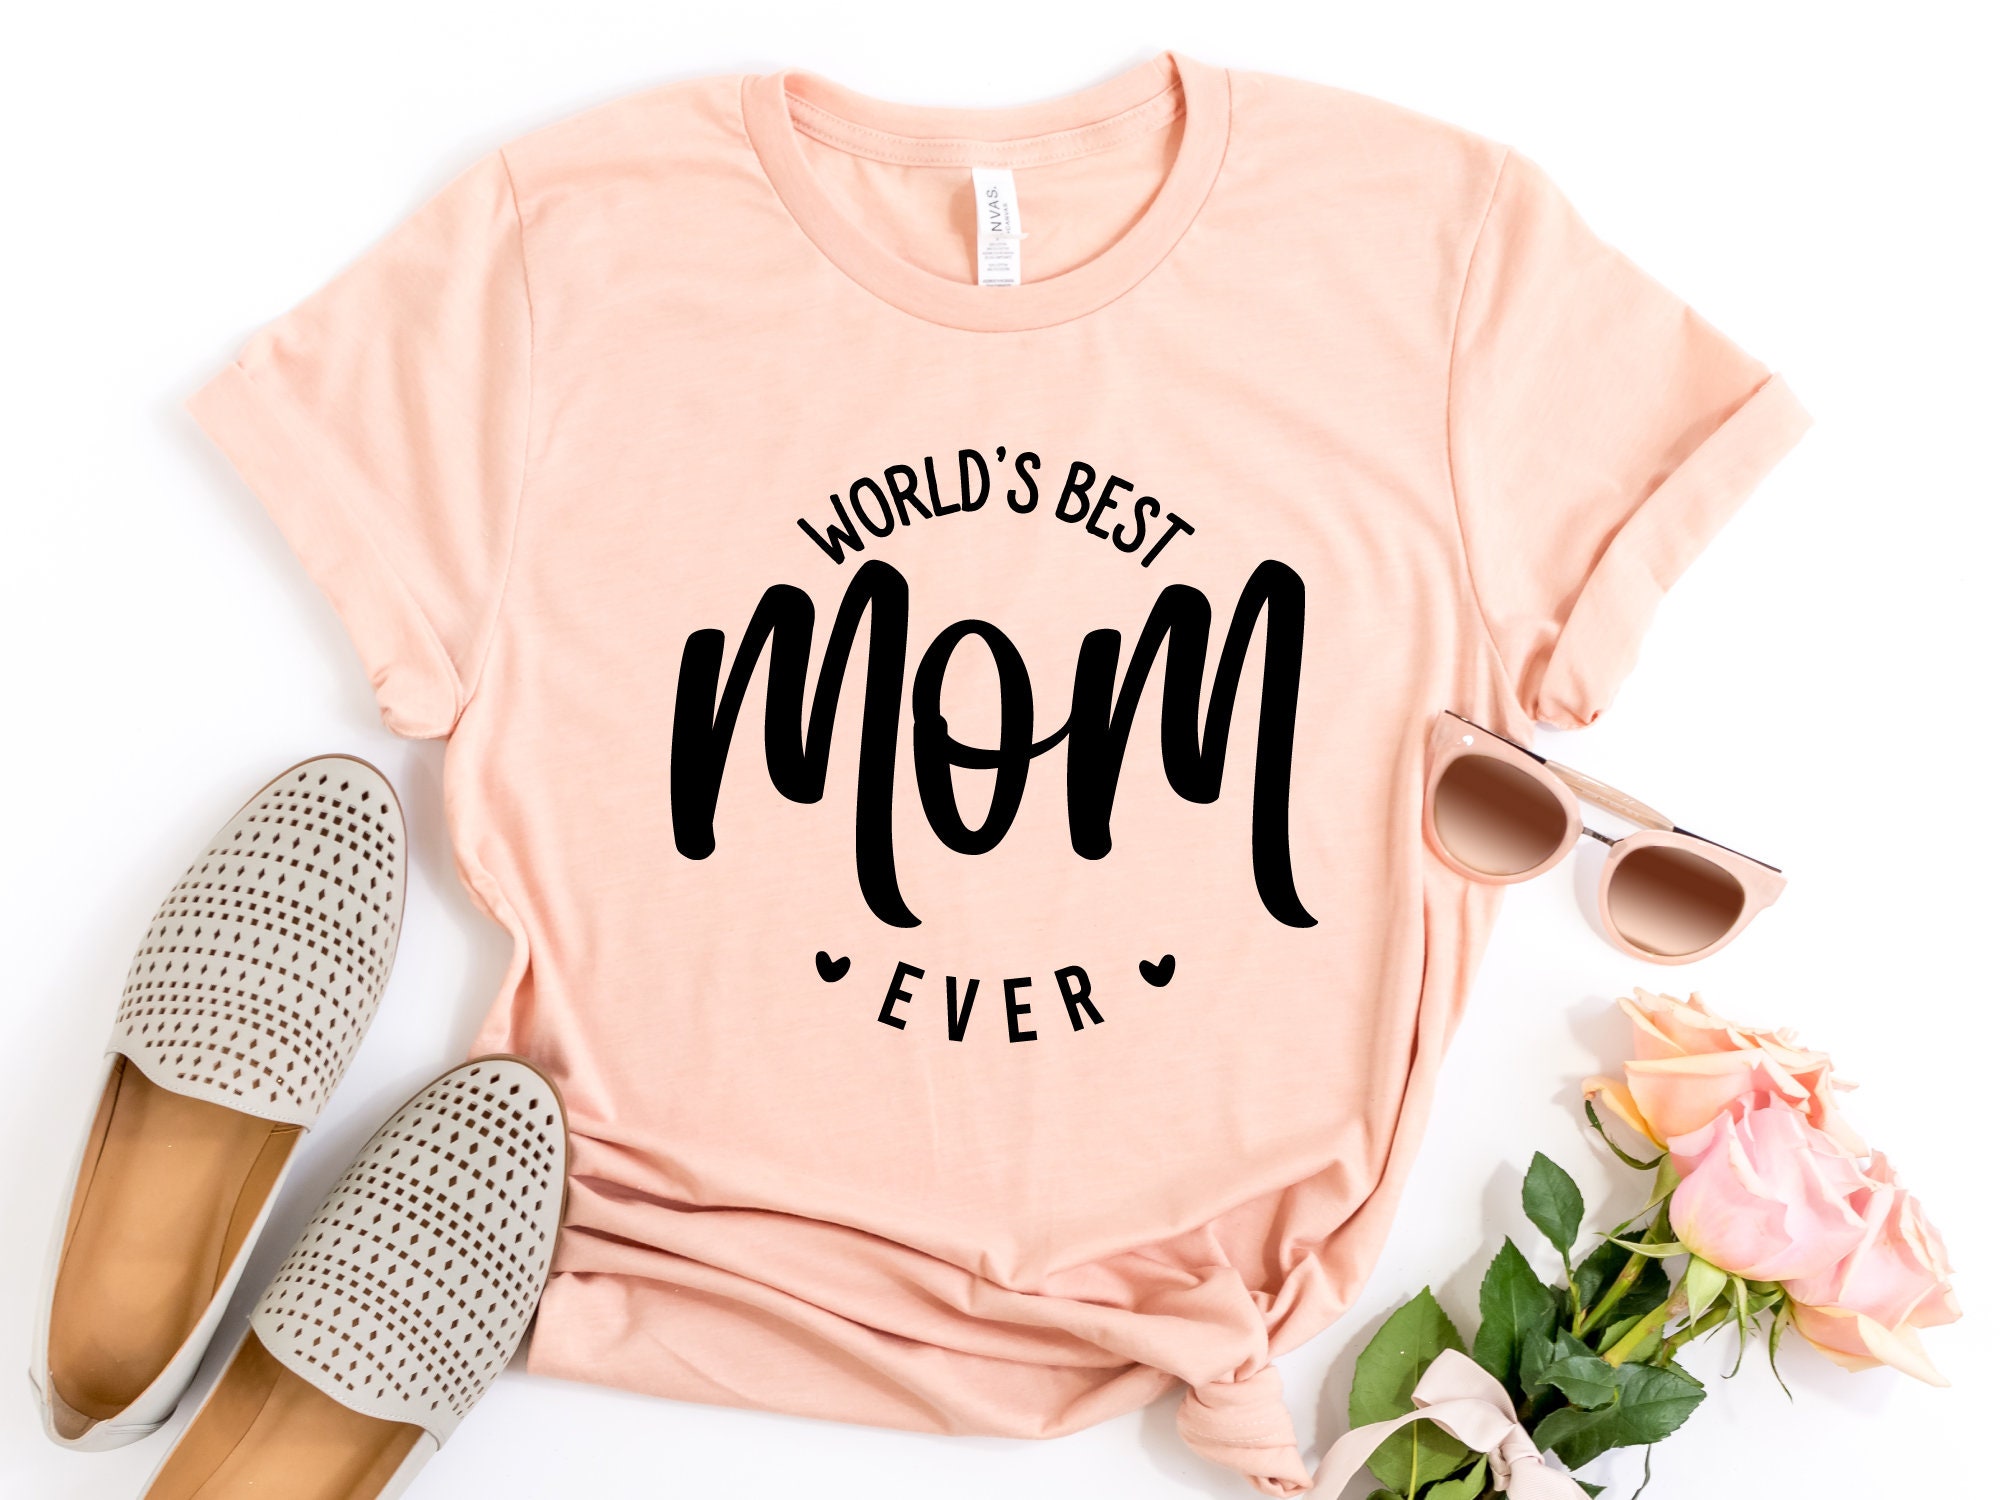 Worlds Best Mom Shirt Mom Shirt Mothers Day Gift Best Mom Ever Shirt Mothers Day Shirt Mom Life T Shirt Gift For Wife Mama Shirt Full Size Up To 5xl